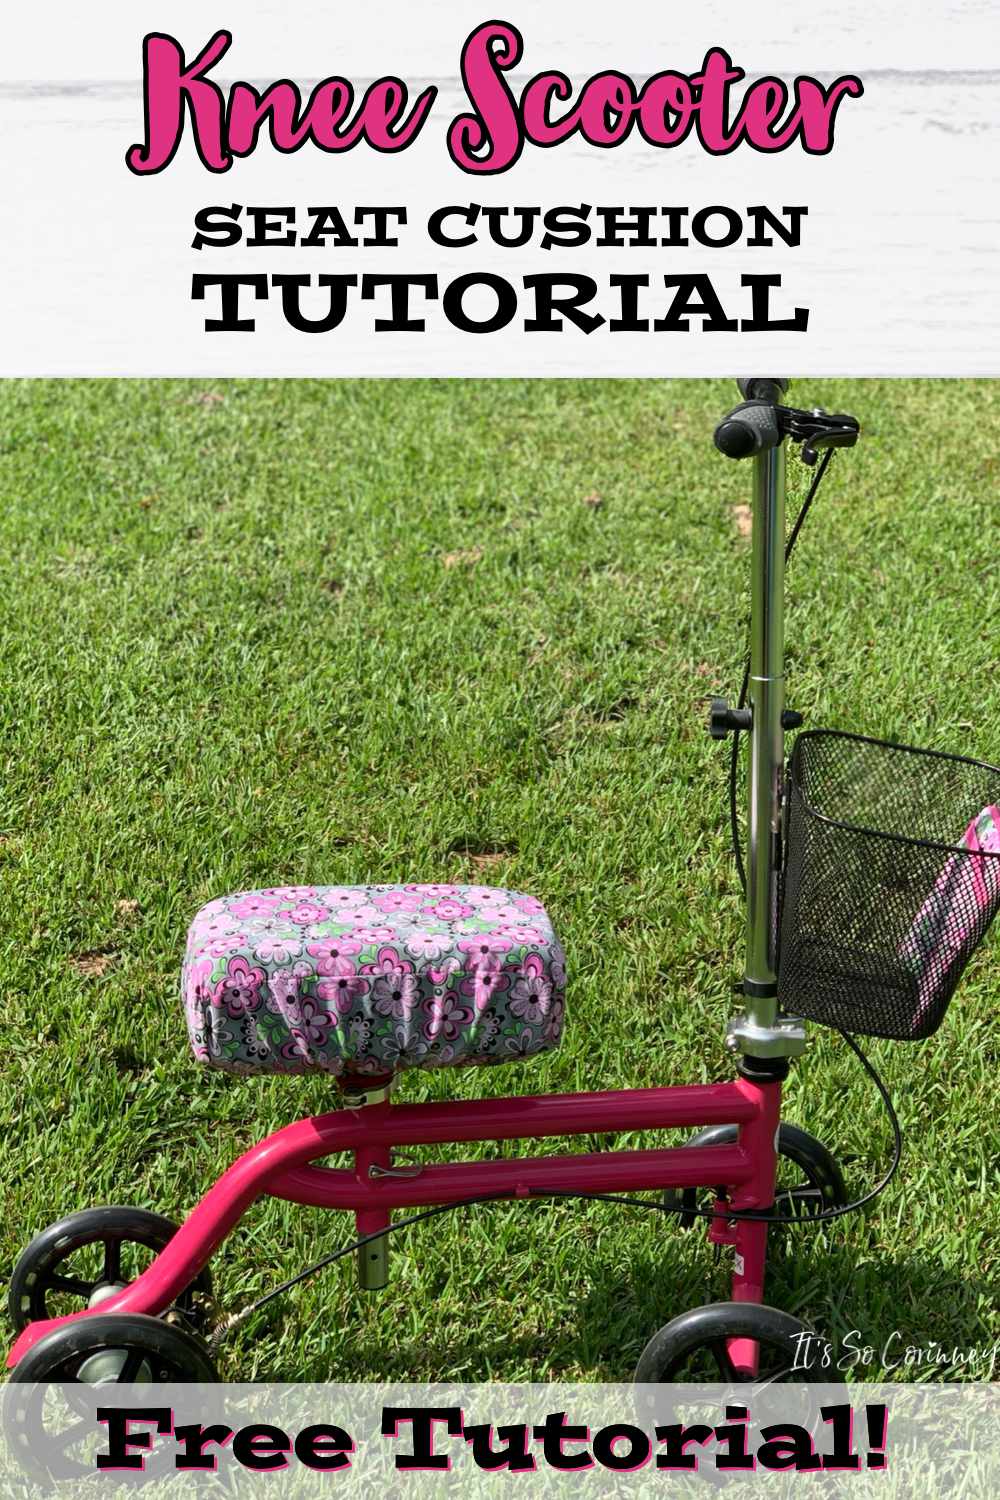 https://itssocorinney.com/wp-content/uploads/Knee-Scooter-Seat-Cushion-Tutorial.png